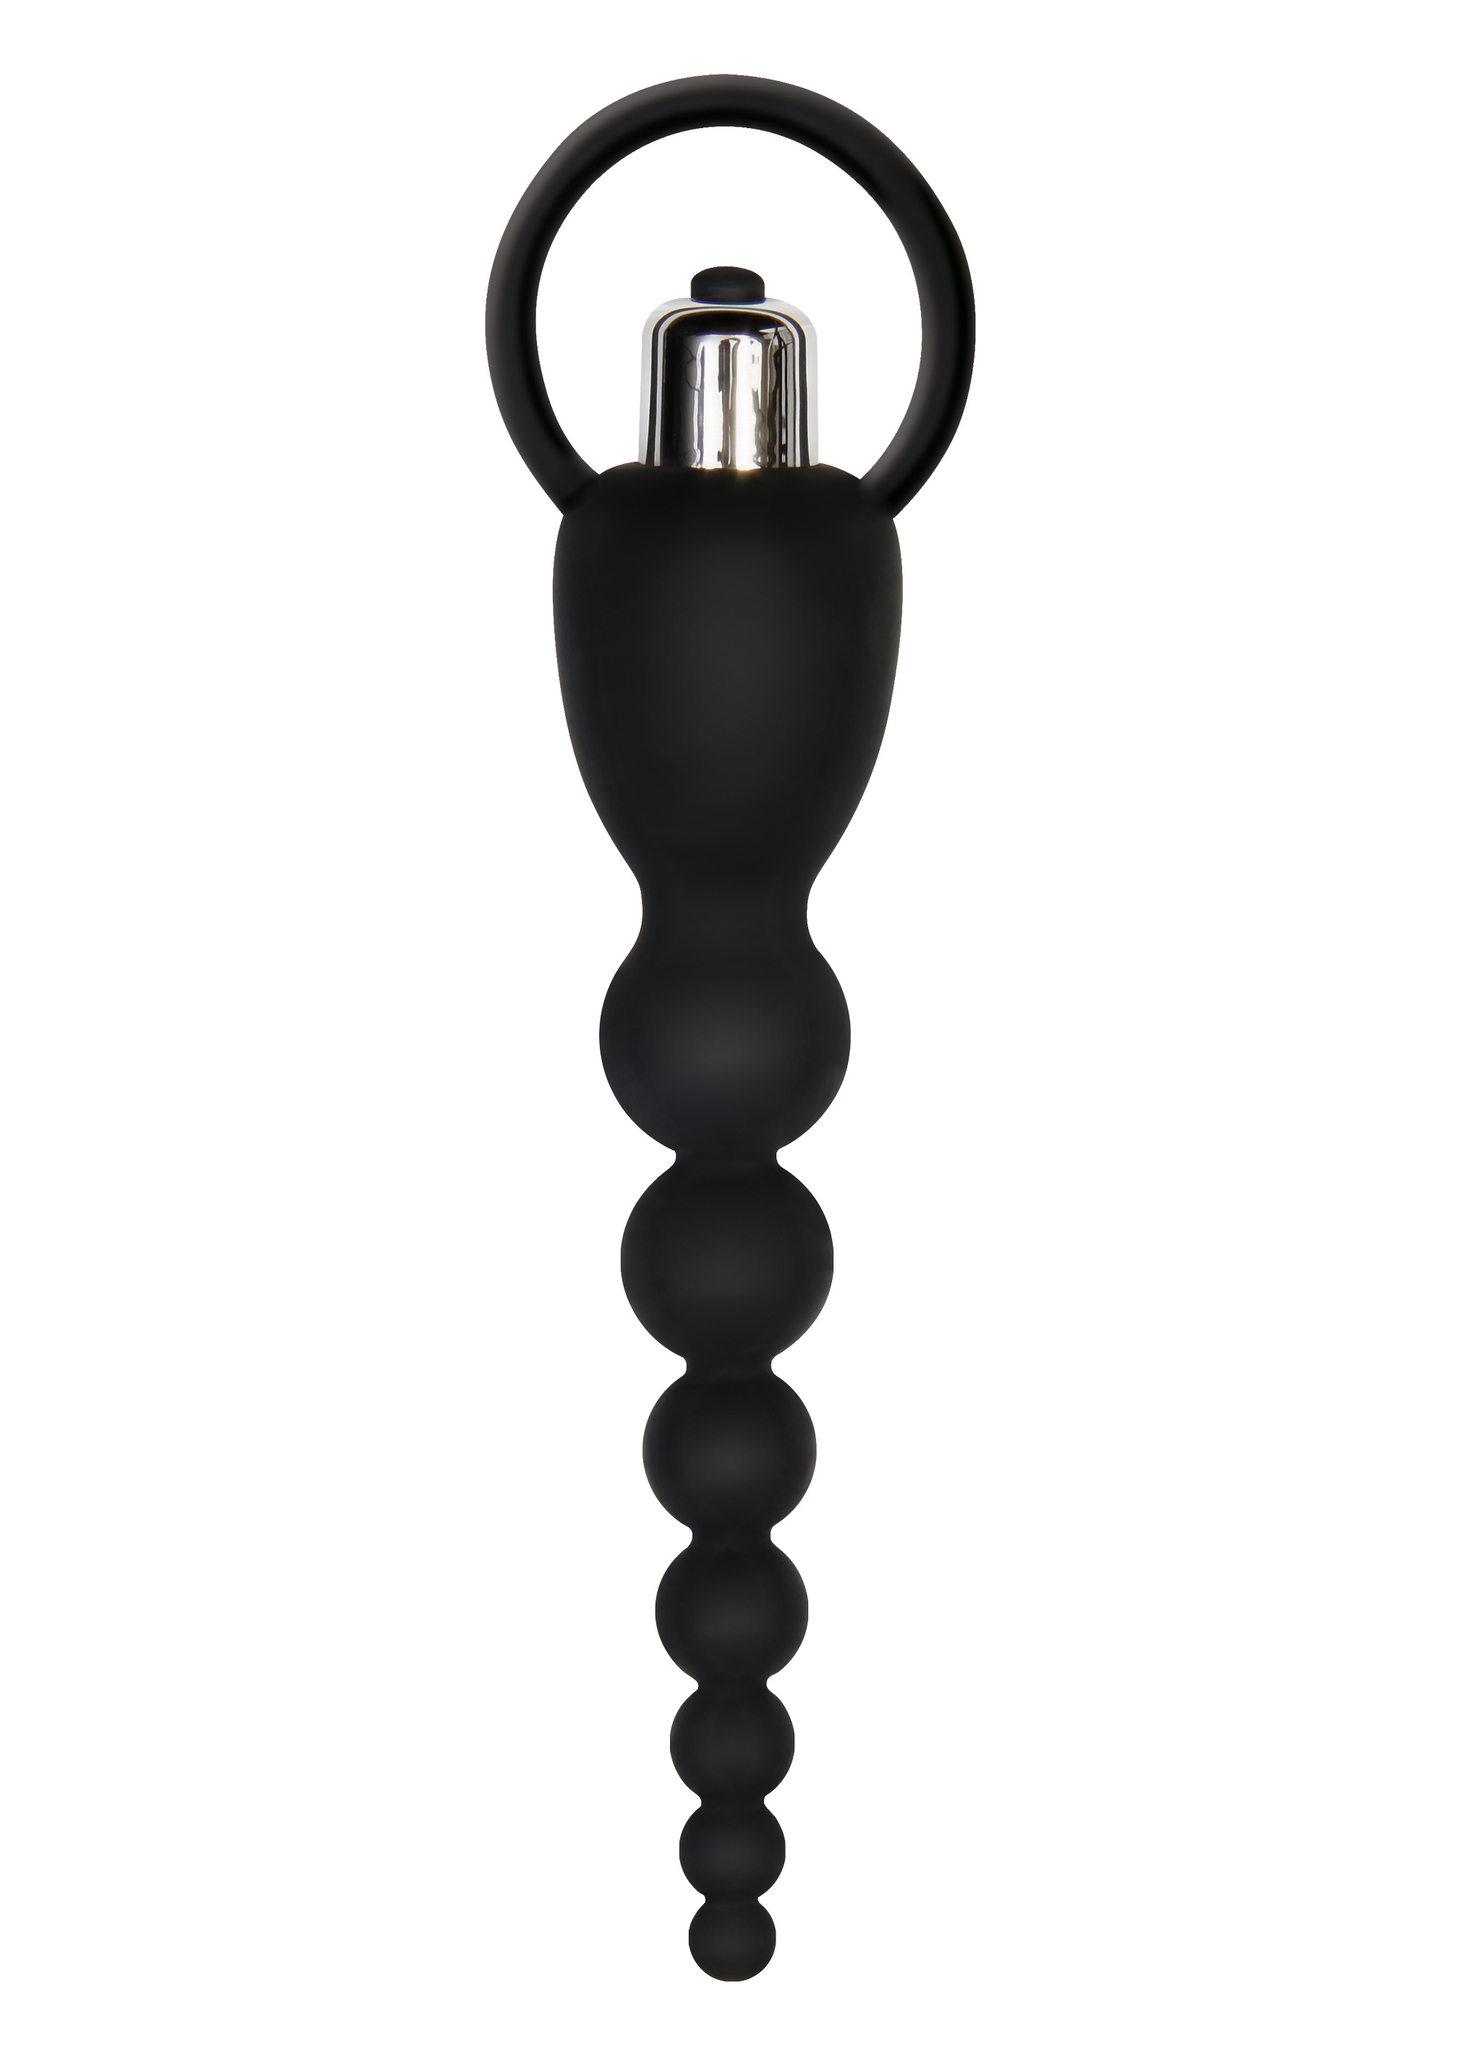 Adam & Eve Vibrating Silicone Anal Beads